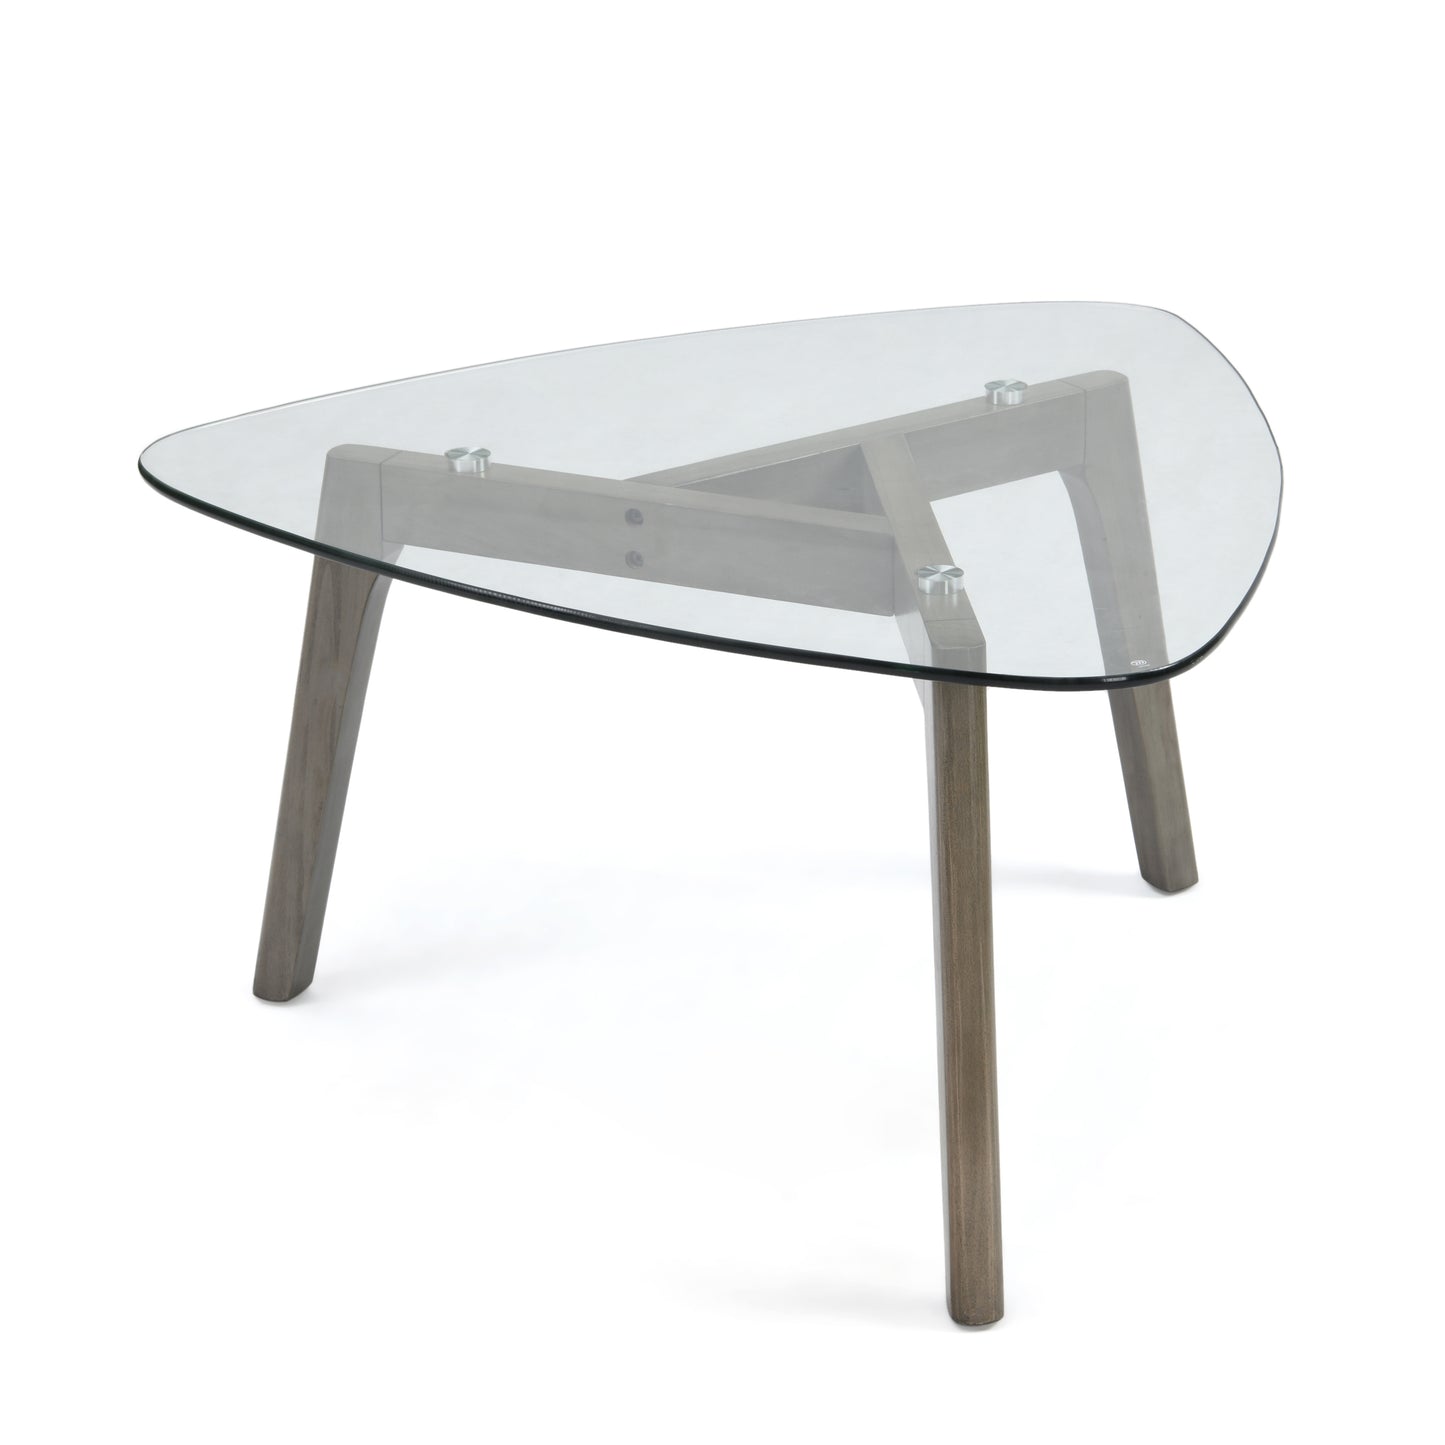 Mosier Mid-Century Modern Coffee Table with Glass Top